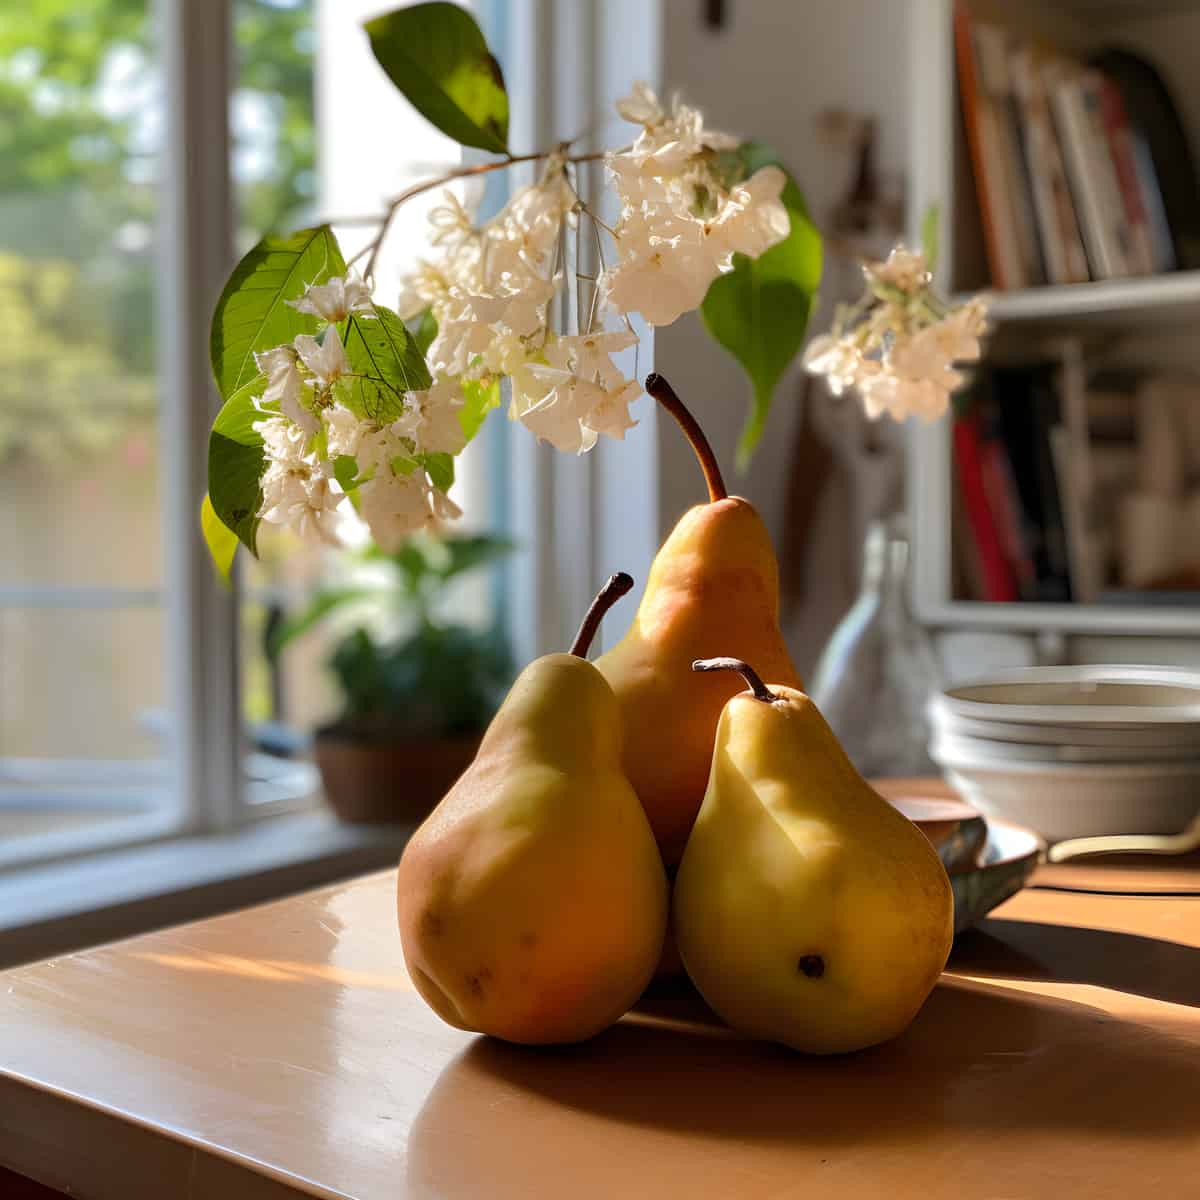 Pyrus Glabra on a kitchen counter